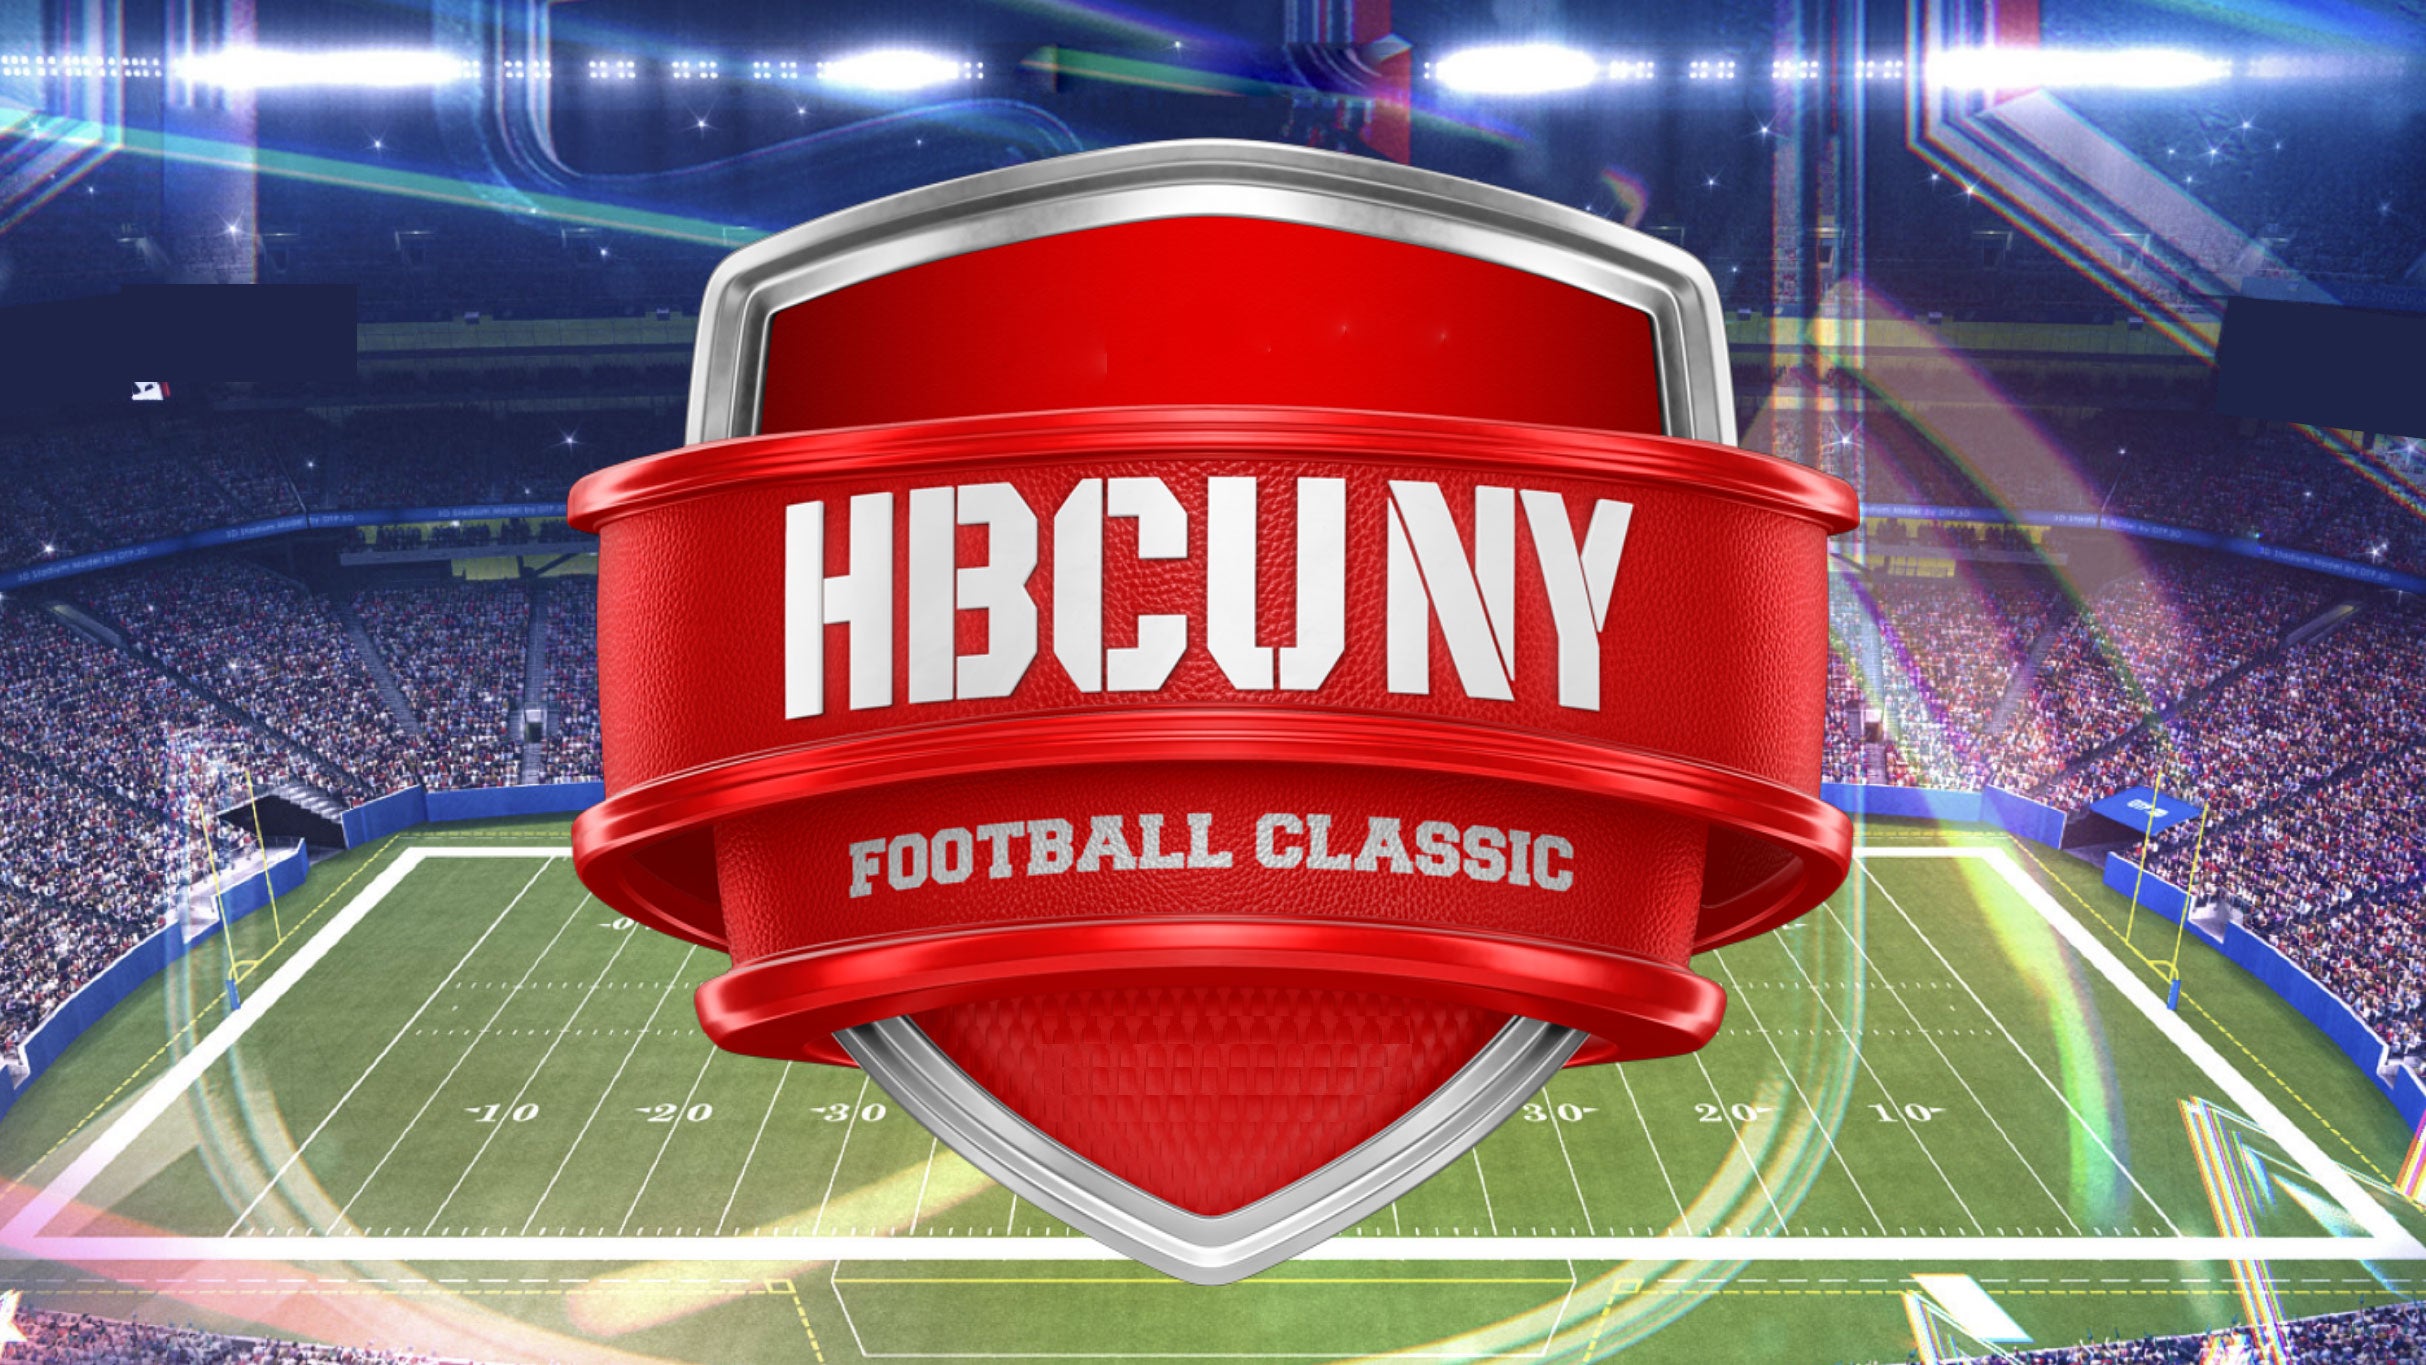 Ticket Reselling HBCU New York Football Classic-Morehouse College v. Howard University